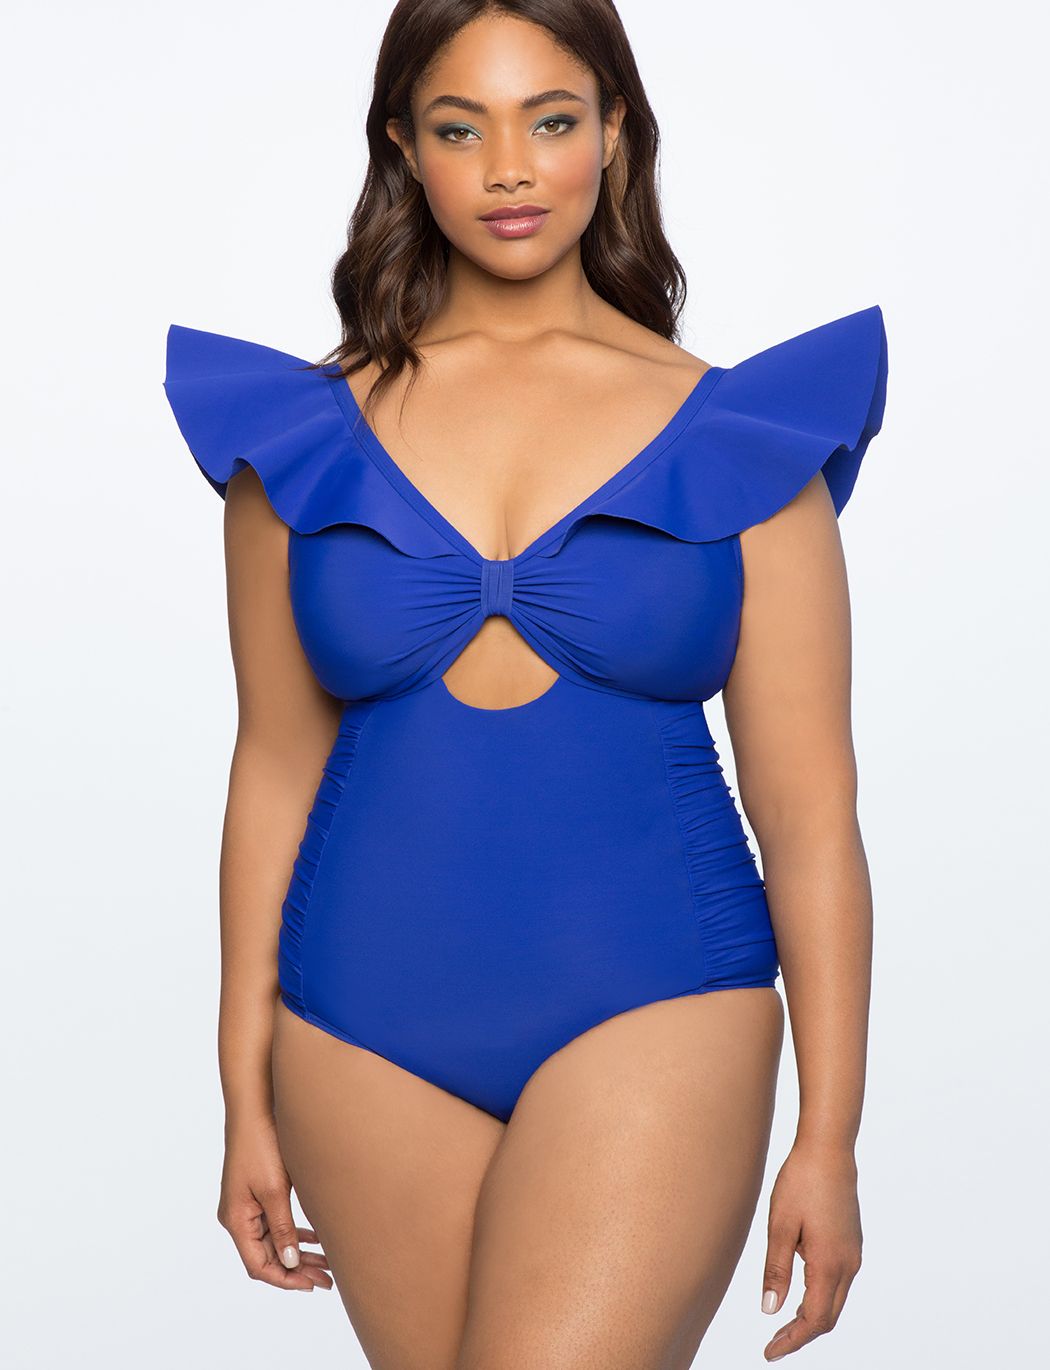 don’t sleep on eloquii’s swim section this year